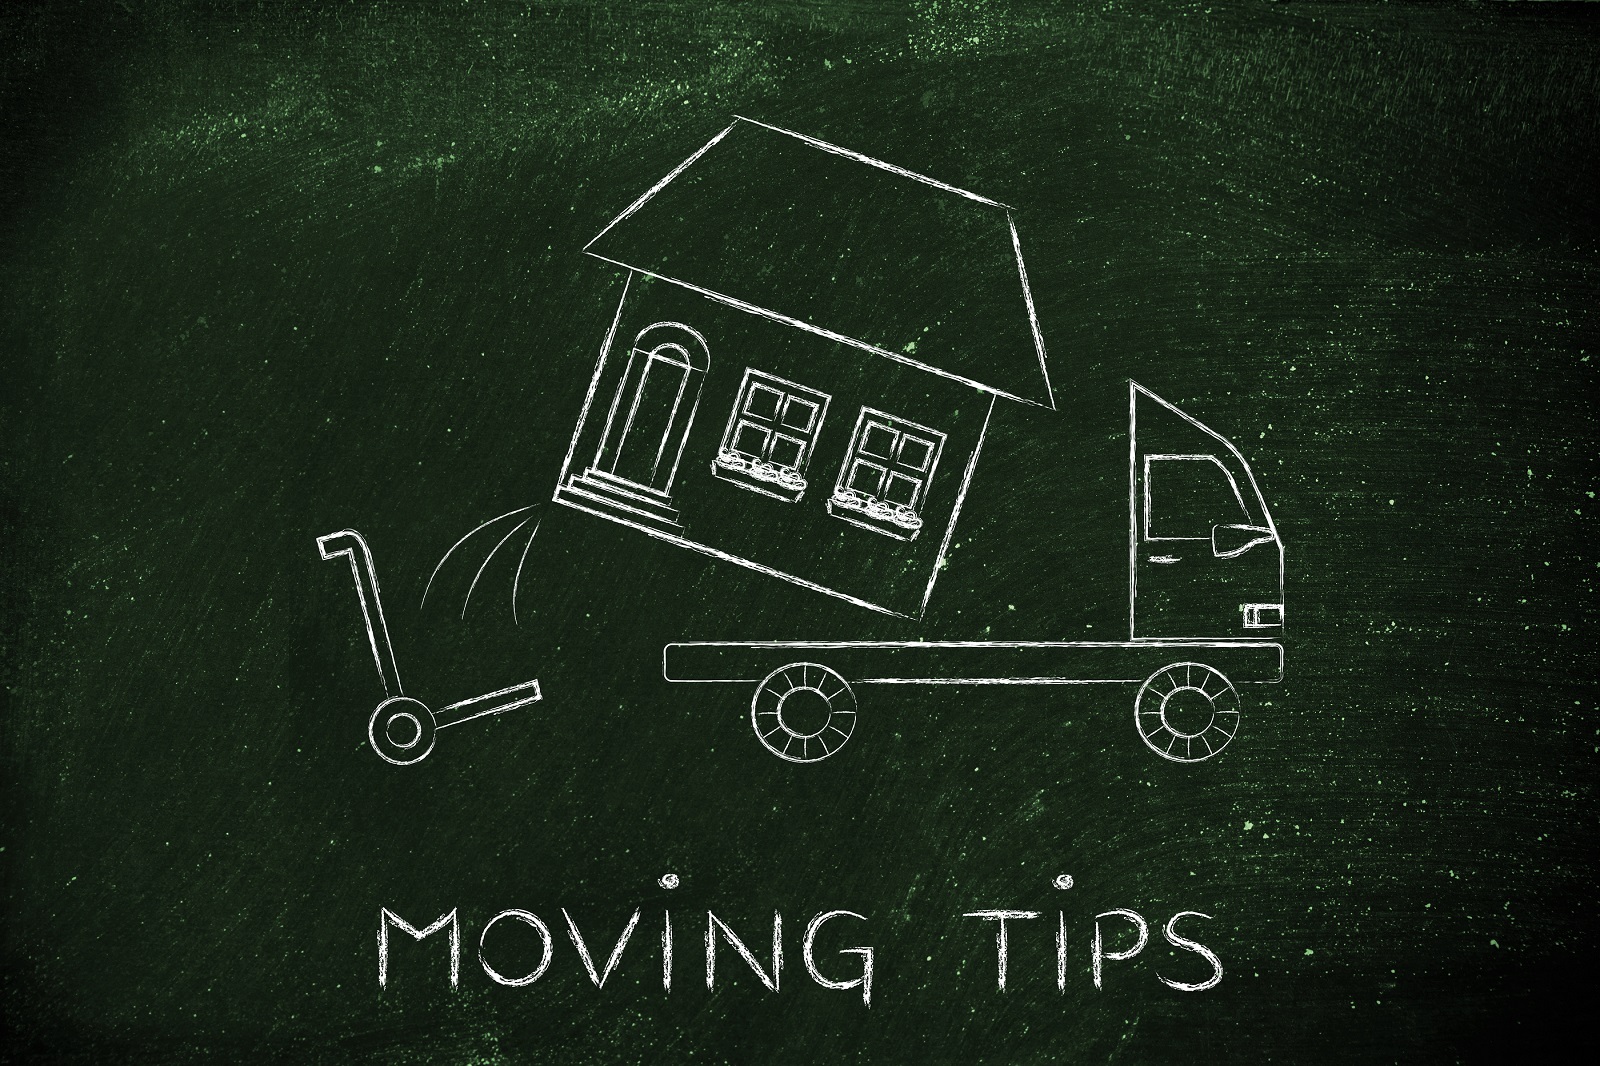 Moving tips for Jean-Luc Andriot blog 090318